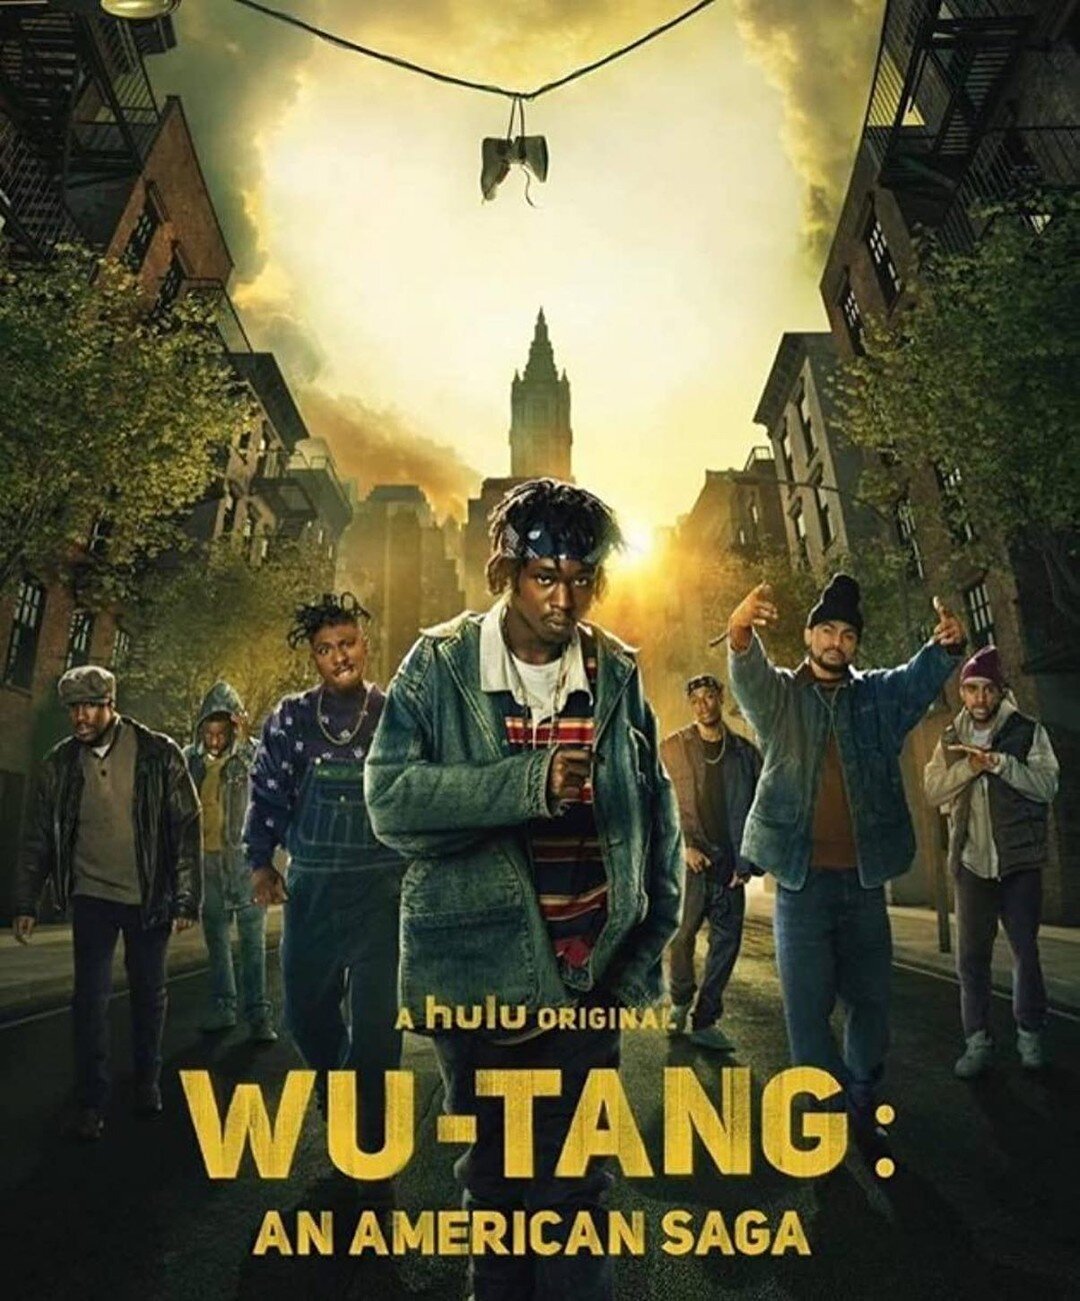 It was a pleasure to work with RZA, Mario Van Peebles, and the rest of the editorial staff on the final season of Wu-Tang: An American Saga which drops today on Hulu.